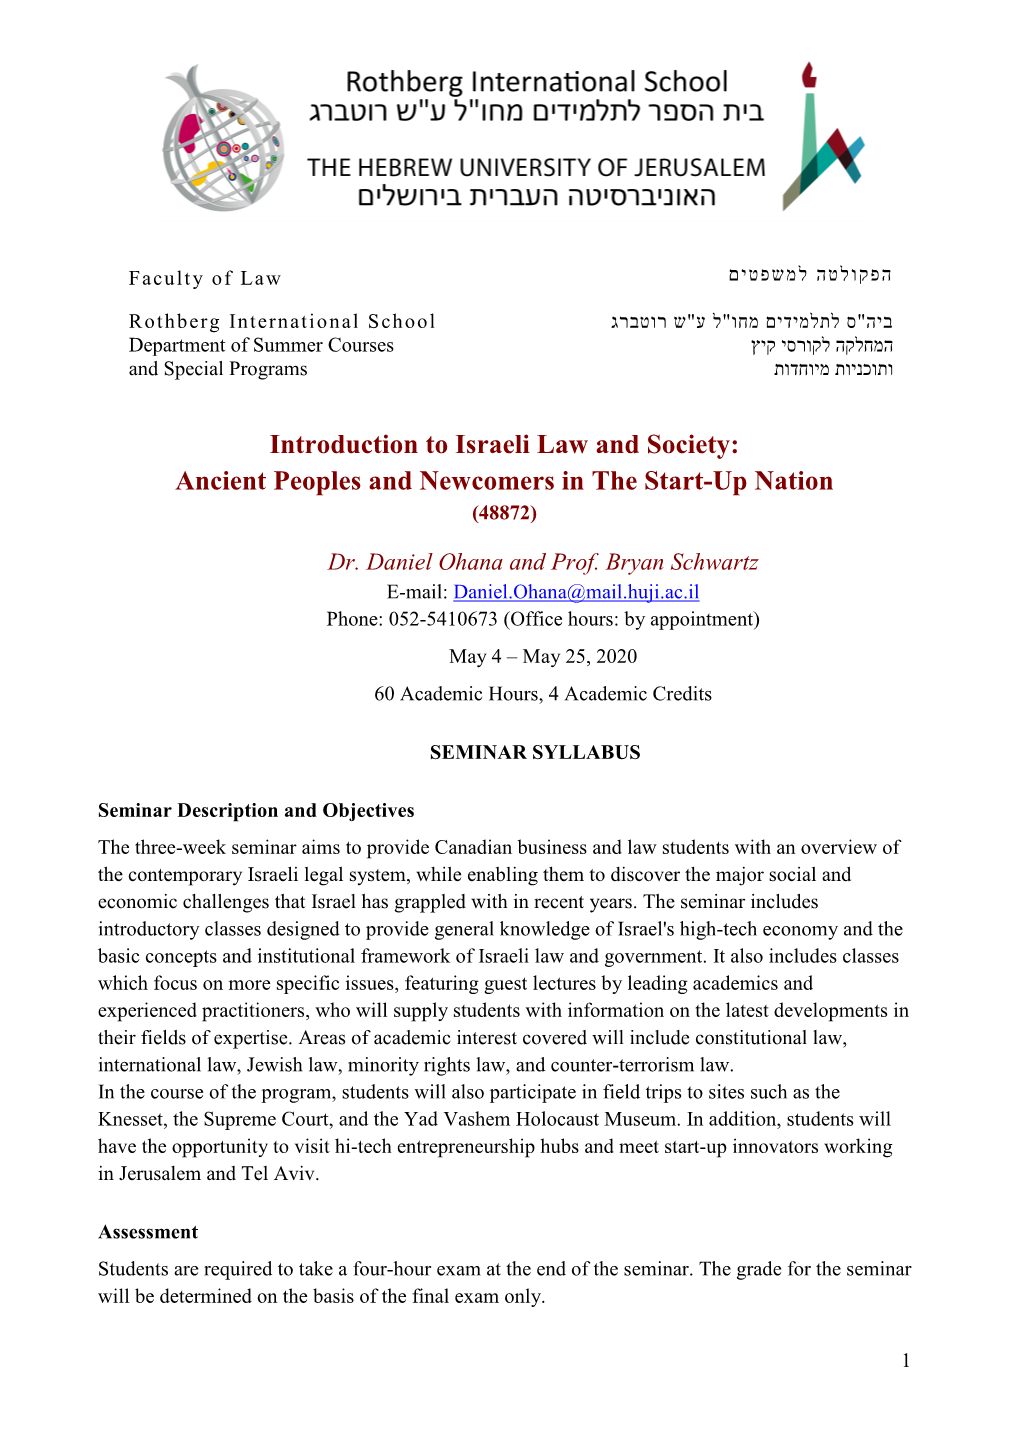 Introduction to Israeli Law and Society: Ancient Peoples and Newcomers in the Start-Up Nation (48872)